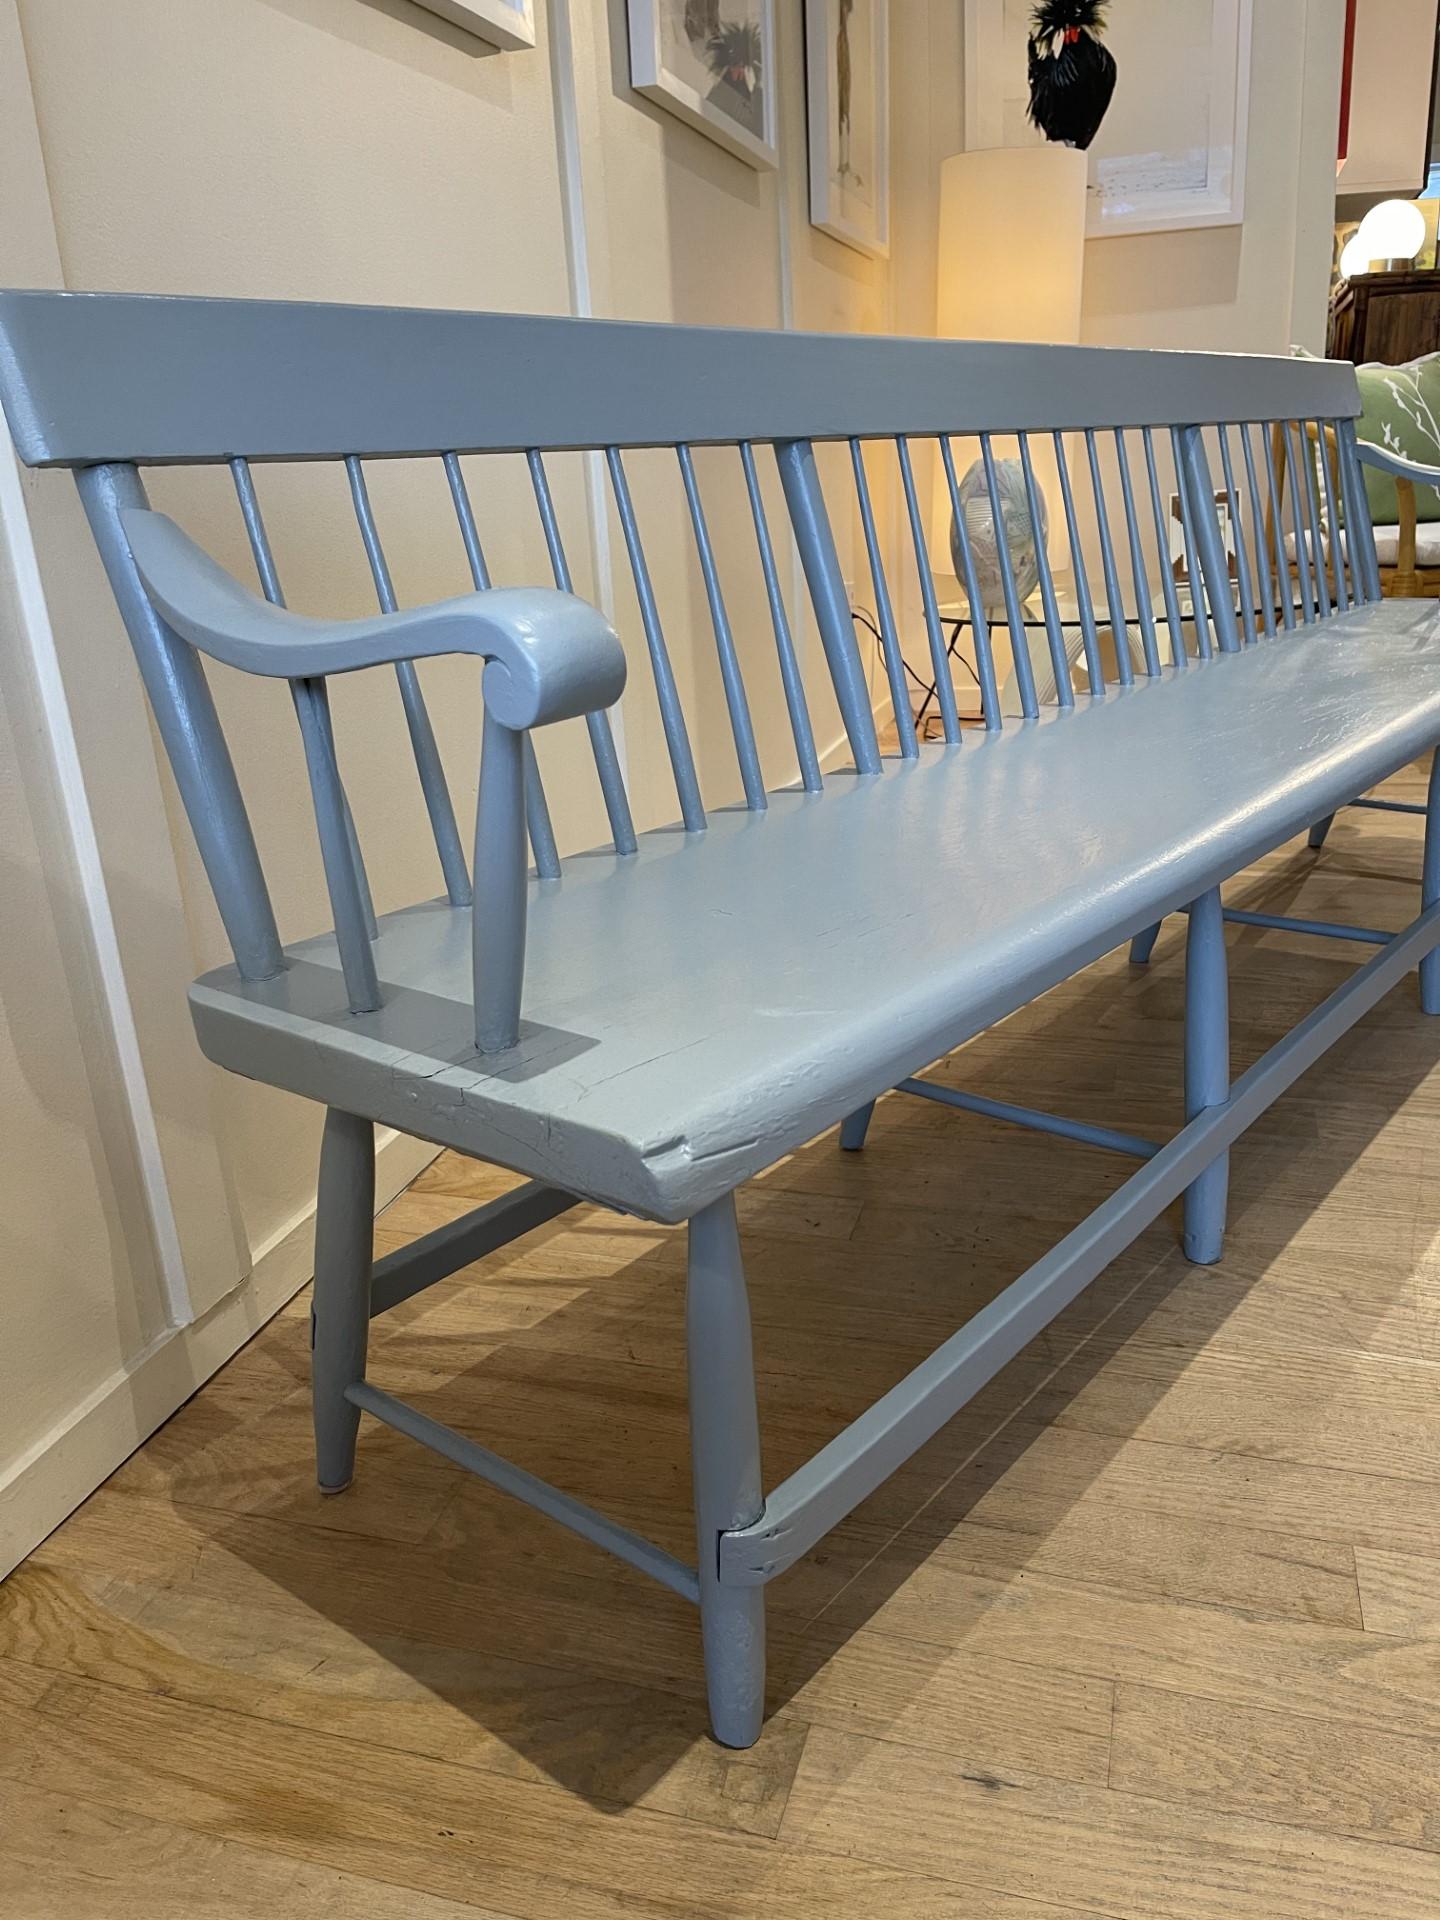 Massachusetts spindle backed  Beacons Bench, painted in the old world classic Buxton Blue, and measures 8 feet. Very good condition, some ware consistent with age.
Perfect for a hall entrance, covered patio, a contemporary Americana design  which